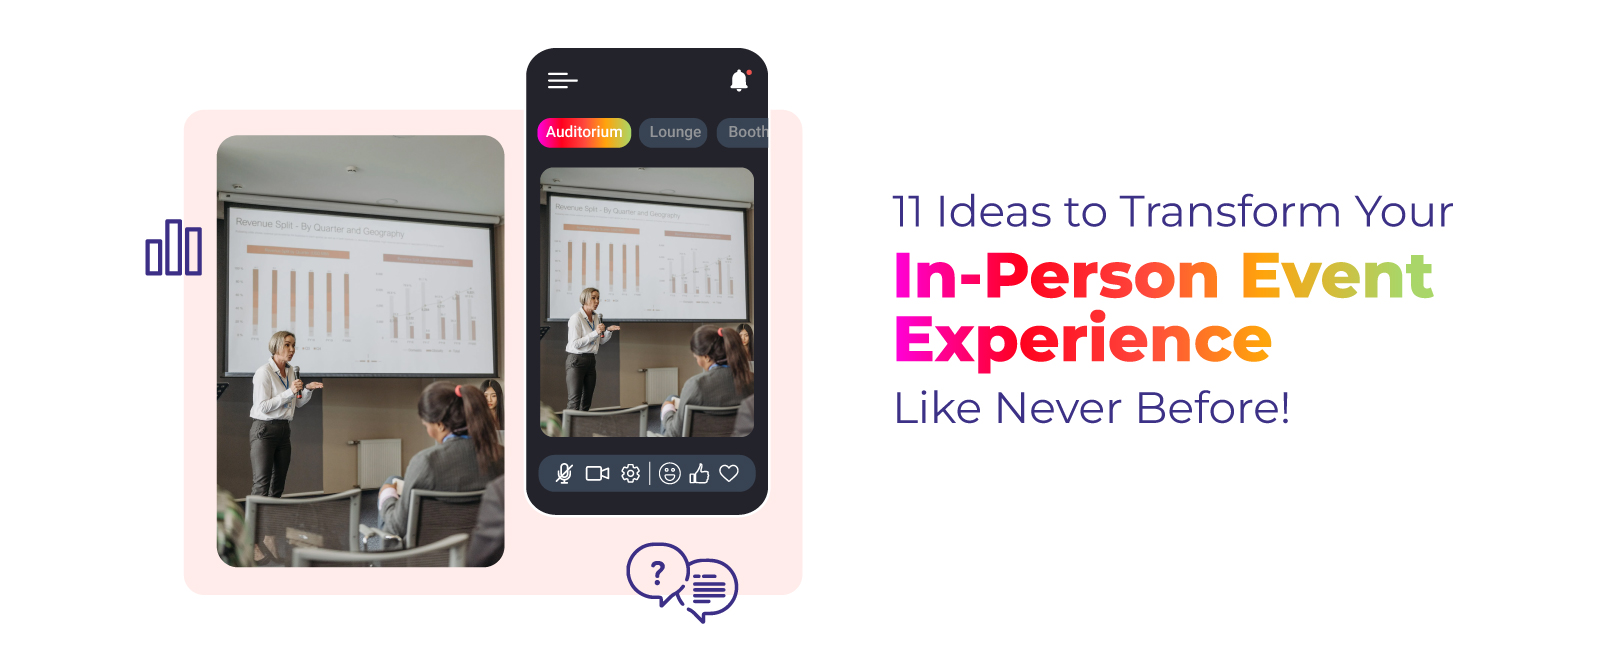 11 Ideas to Transform Your In-Person Event Experience Like Never Before!